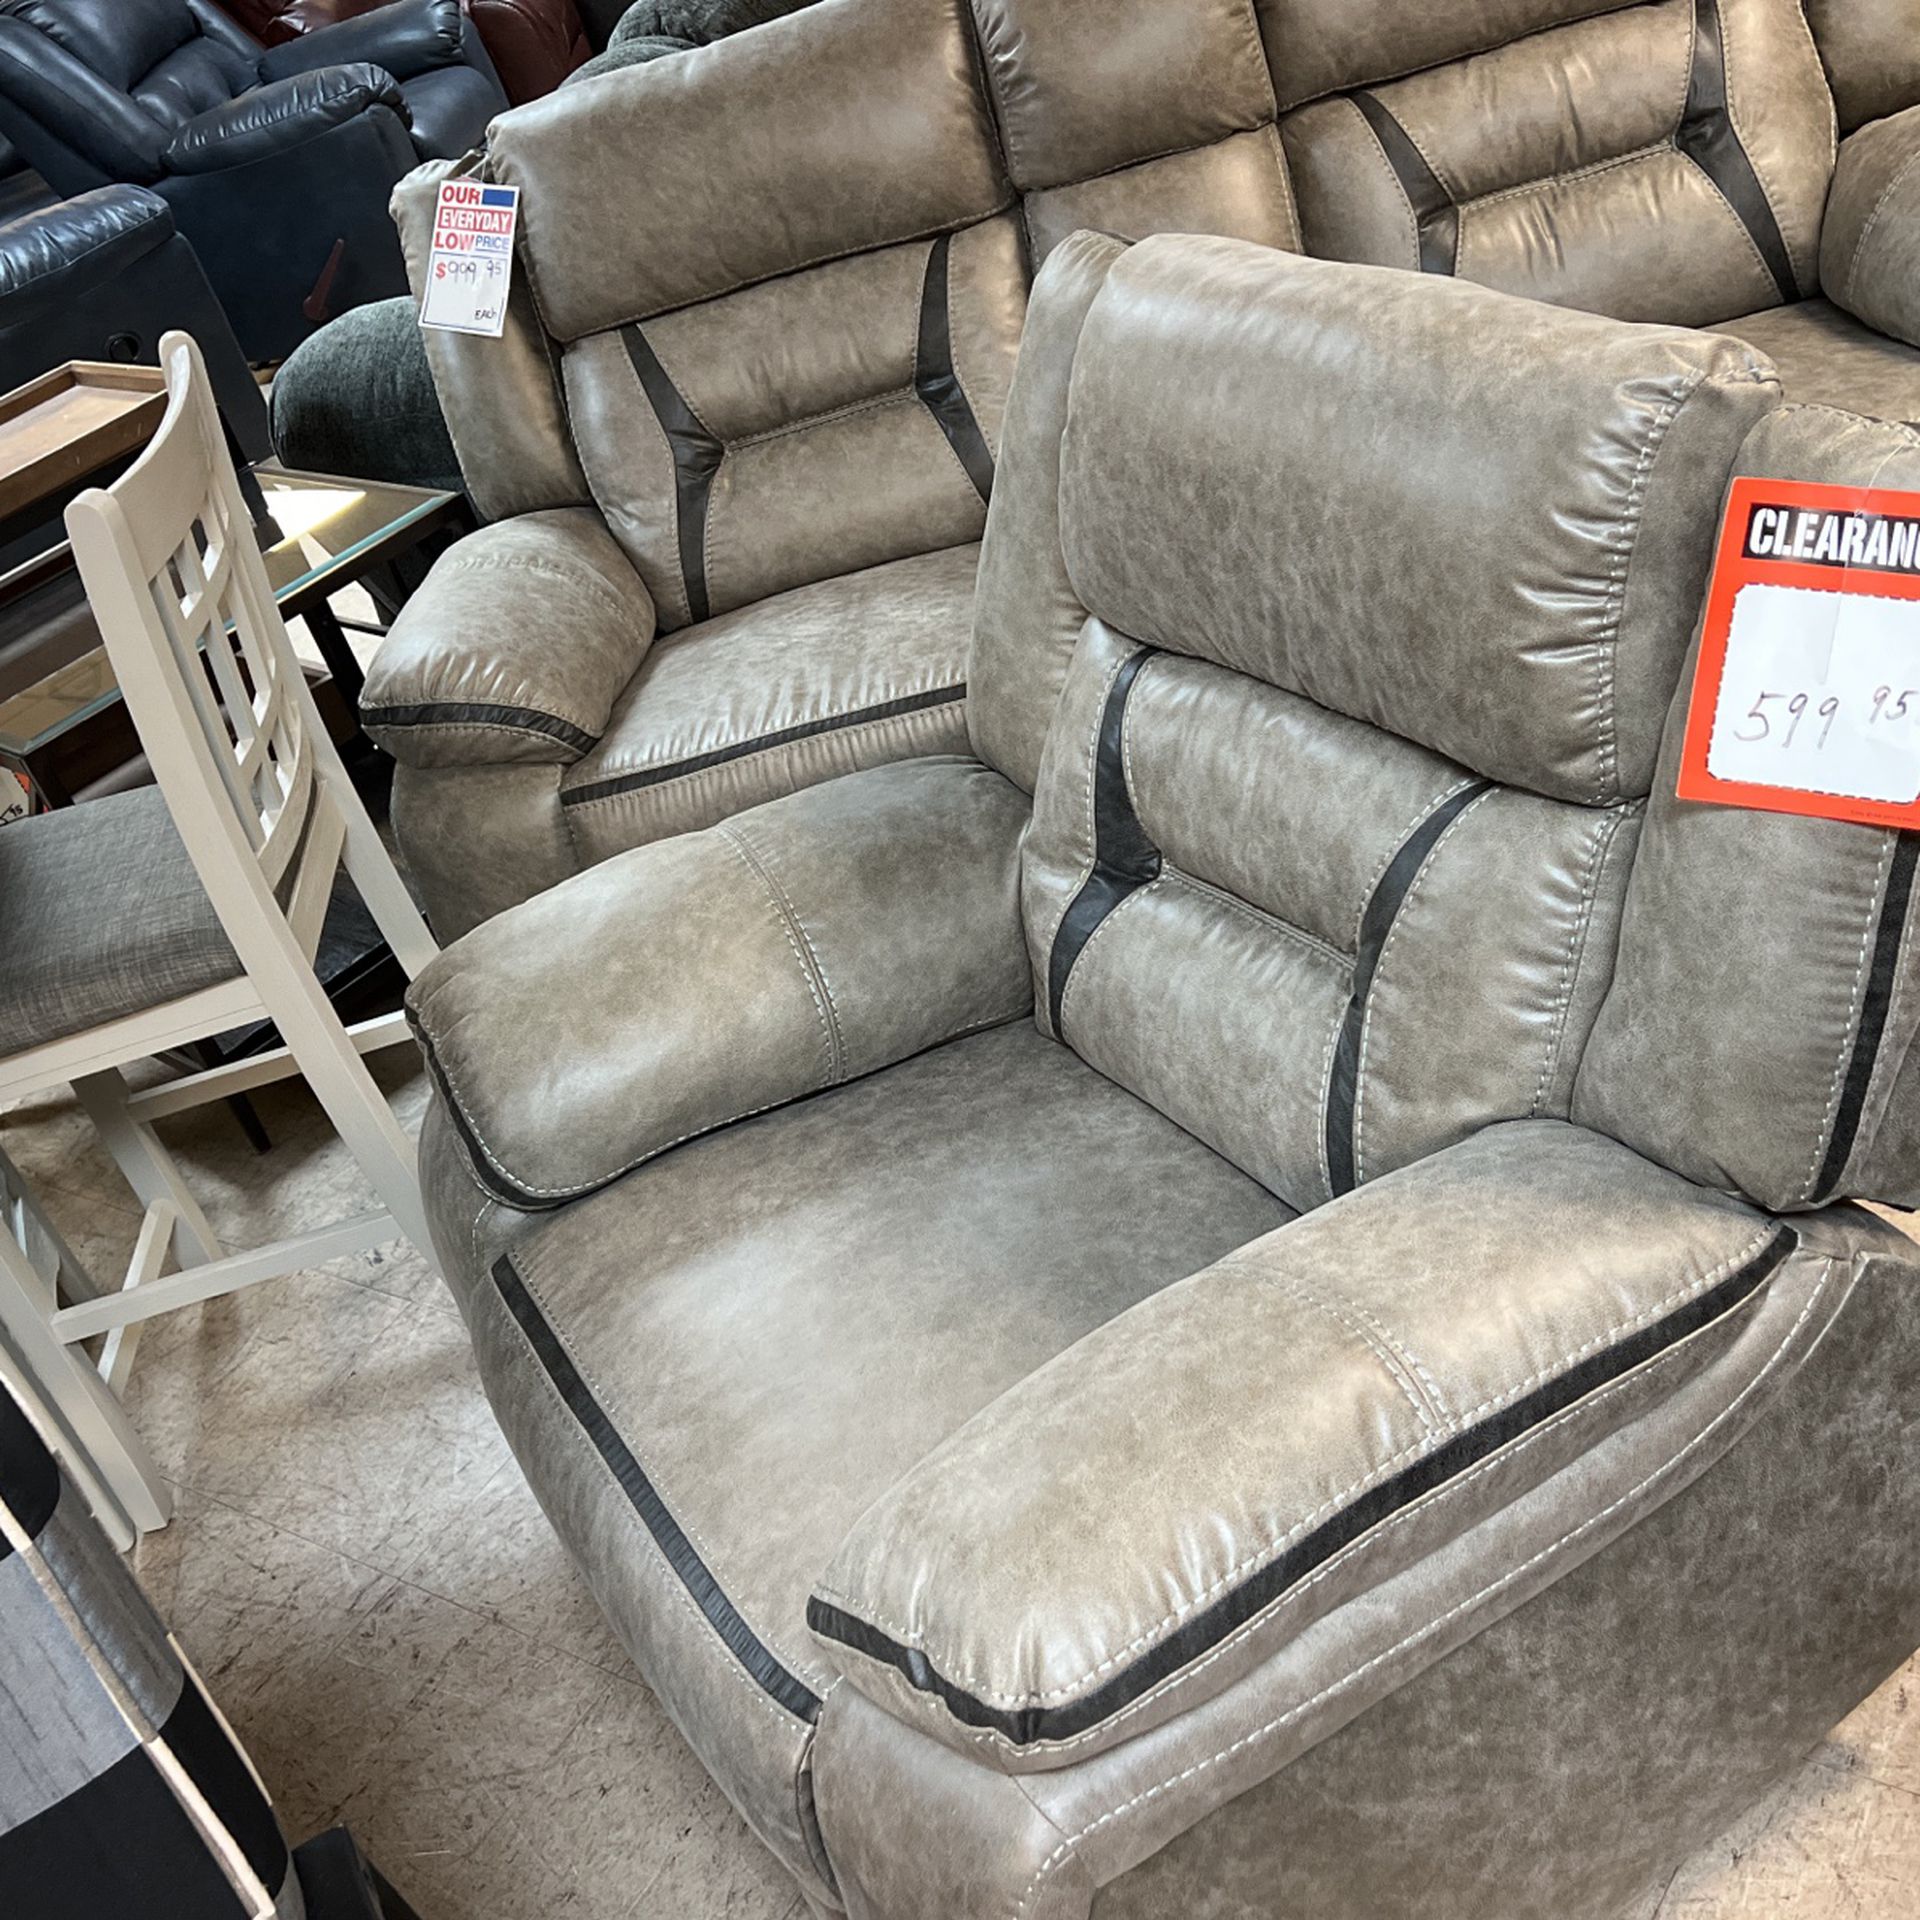 Brand new recliner, couch and recliner loveseat for $2000 recliner chair for $600 grabbing go today. Hurry for best selection.